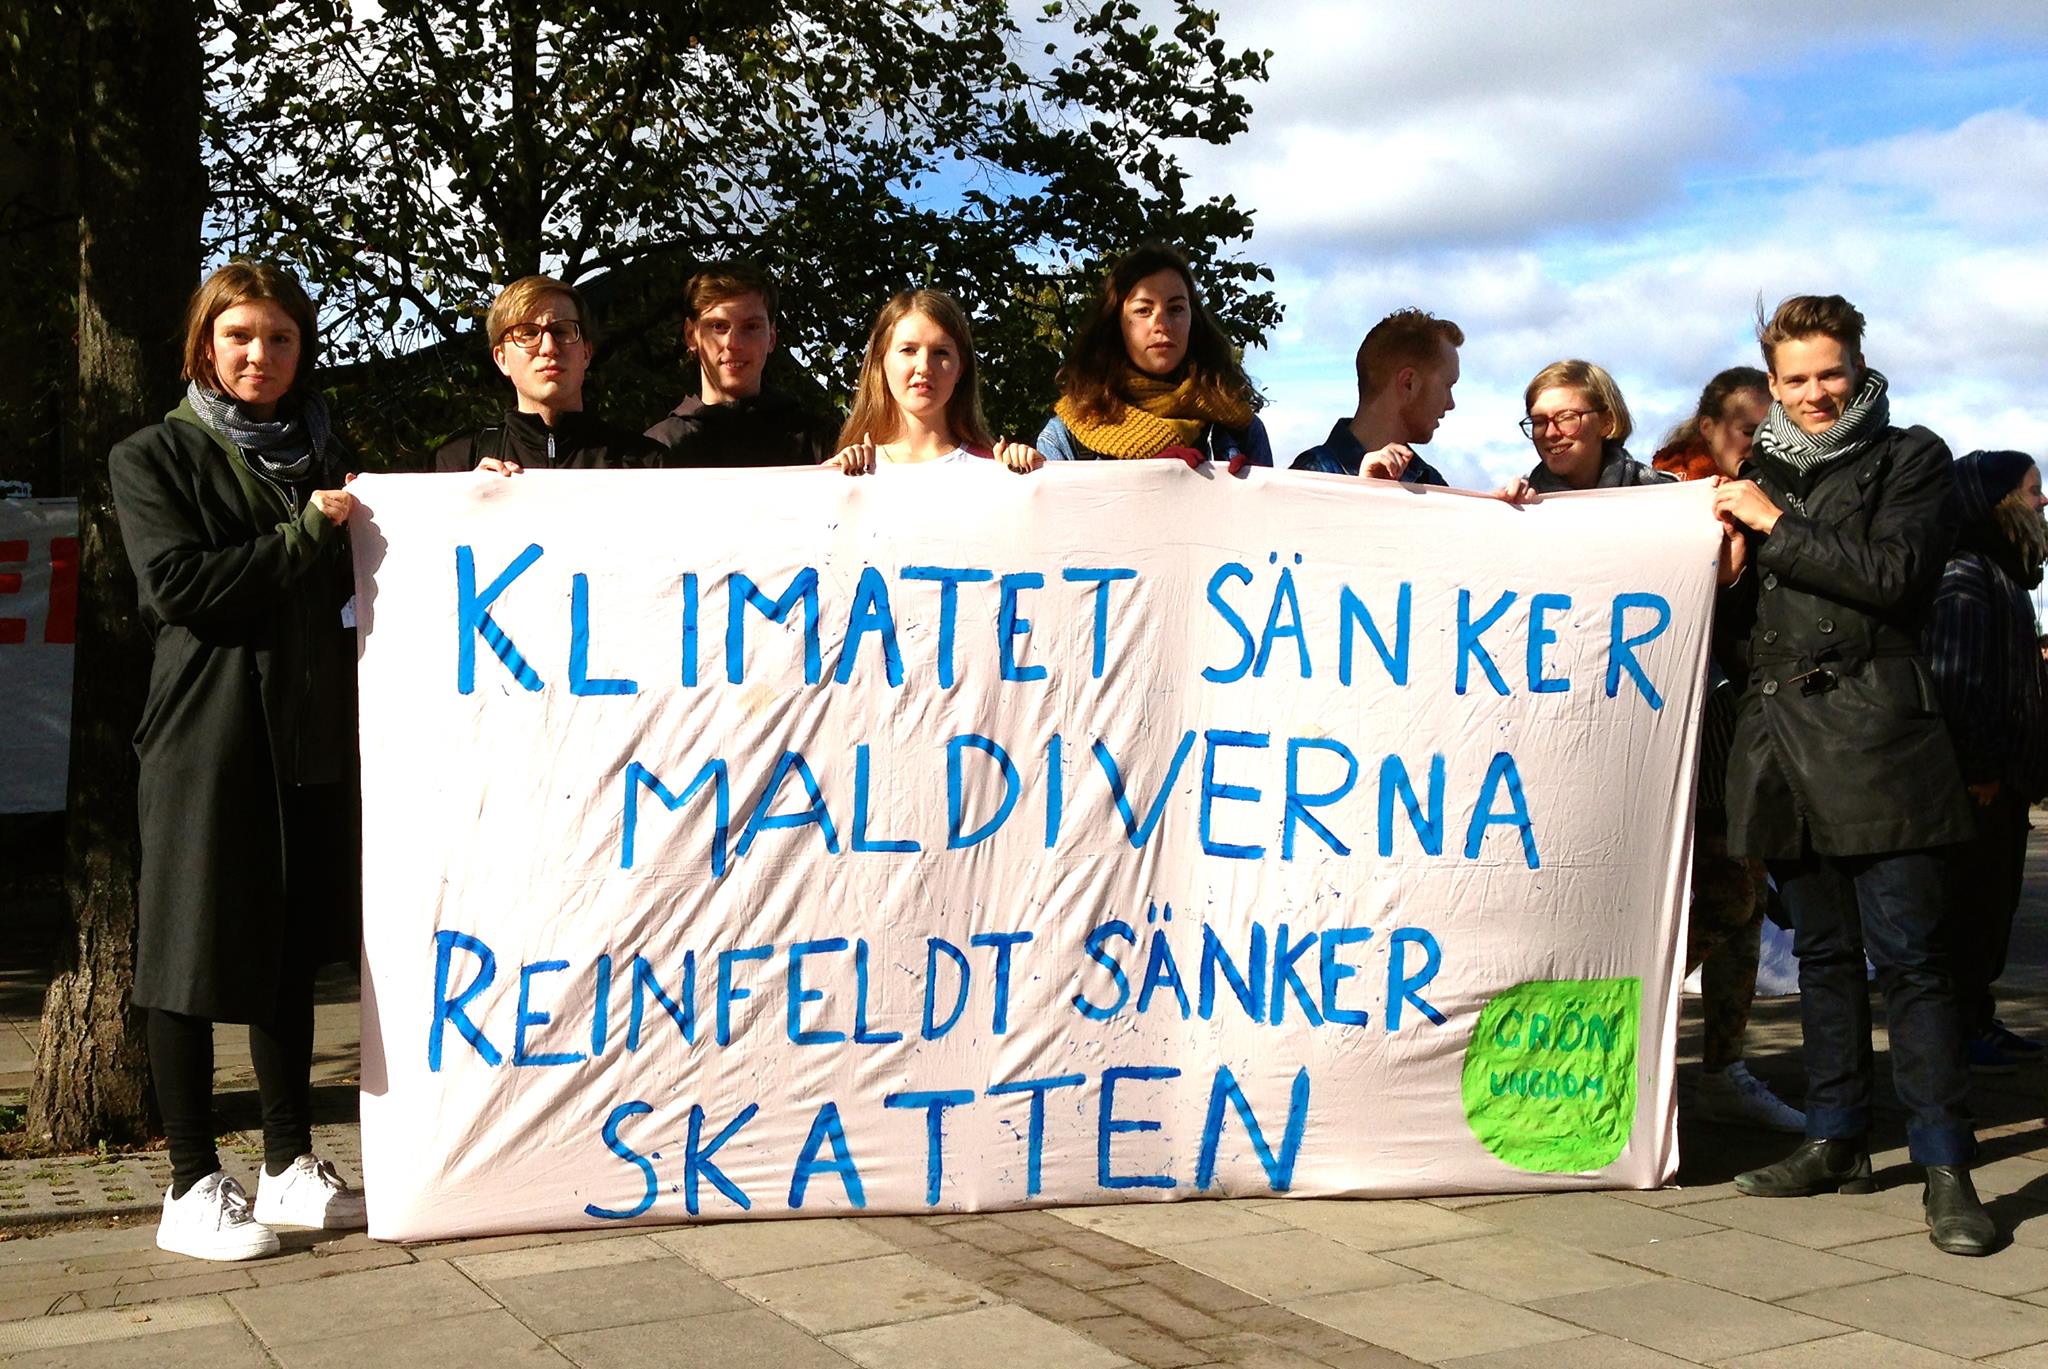 From Klimatskriket (Climate scream) with Grön Ungdom when IPCC released its 5th Assessment Report in 2013 in Stockholm.